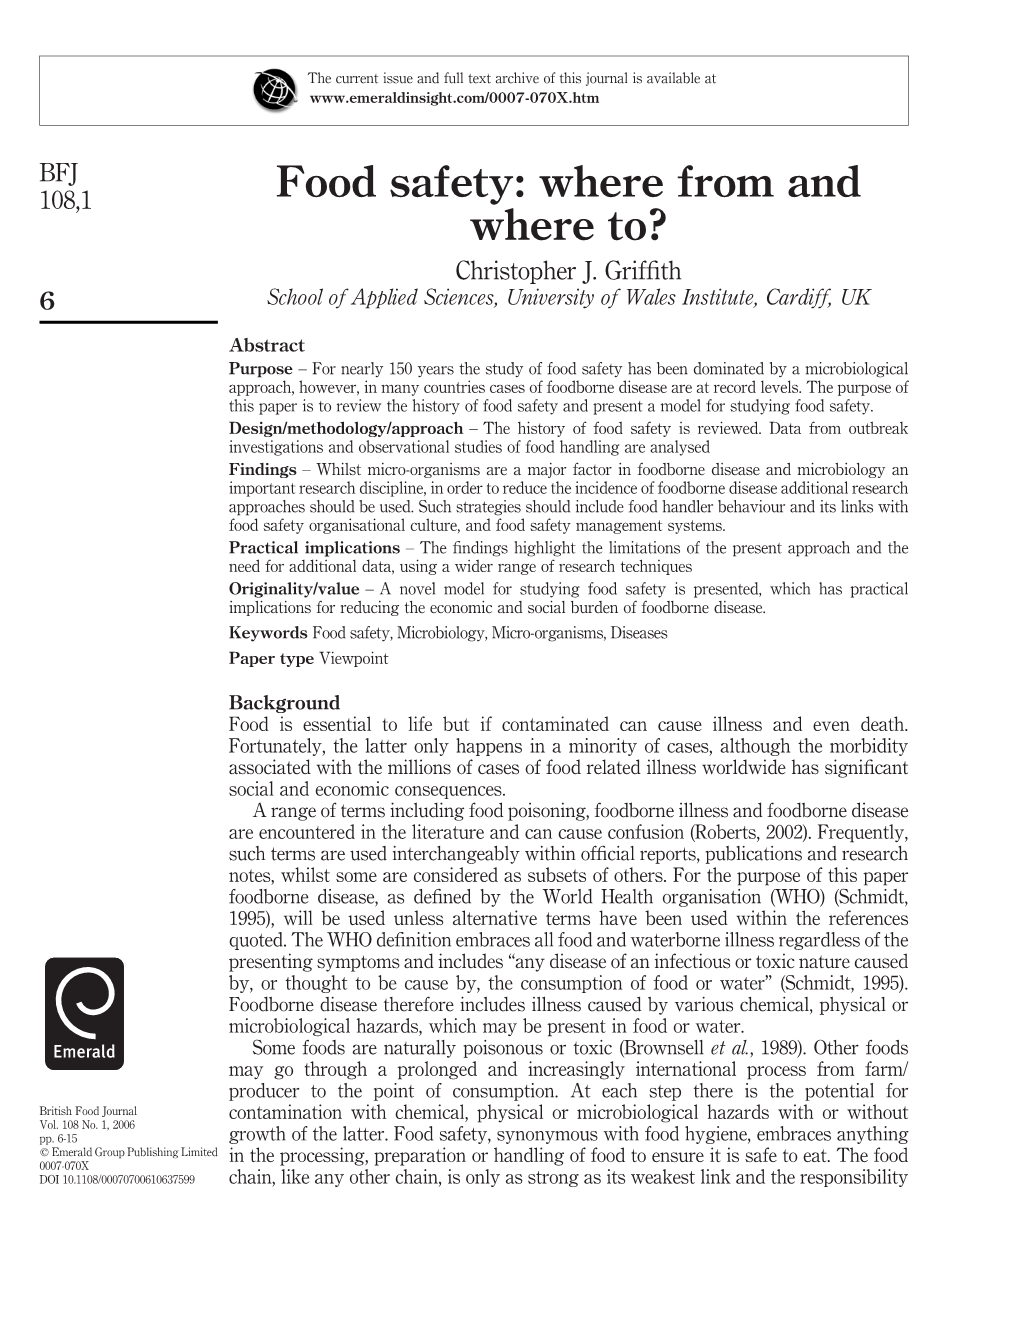 Food Safety: Where from and Where To? Christopher J